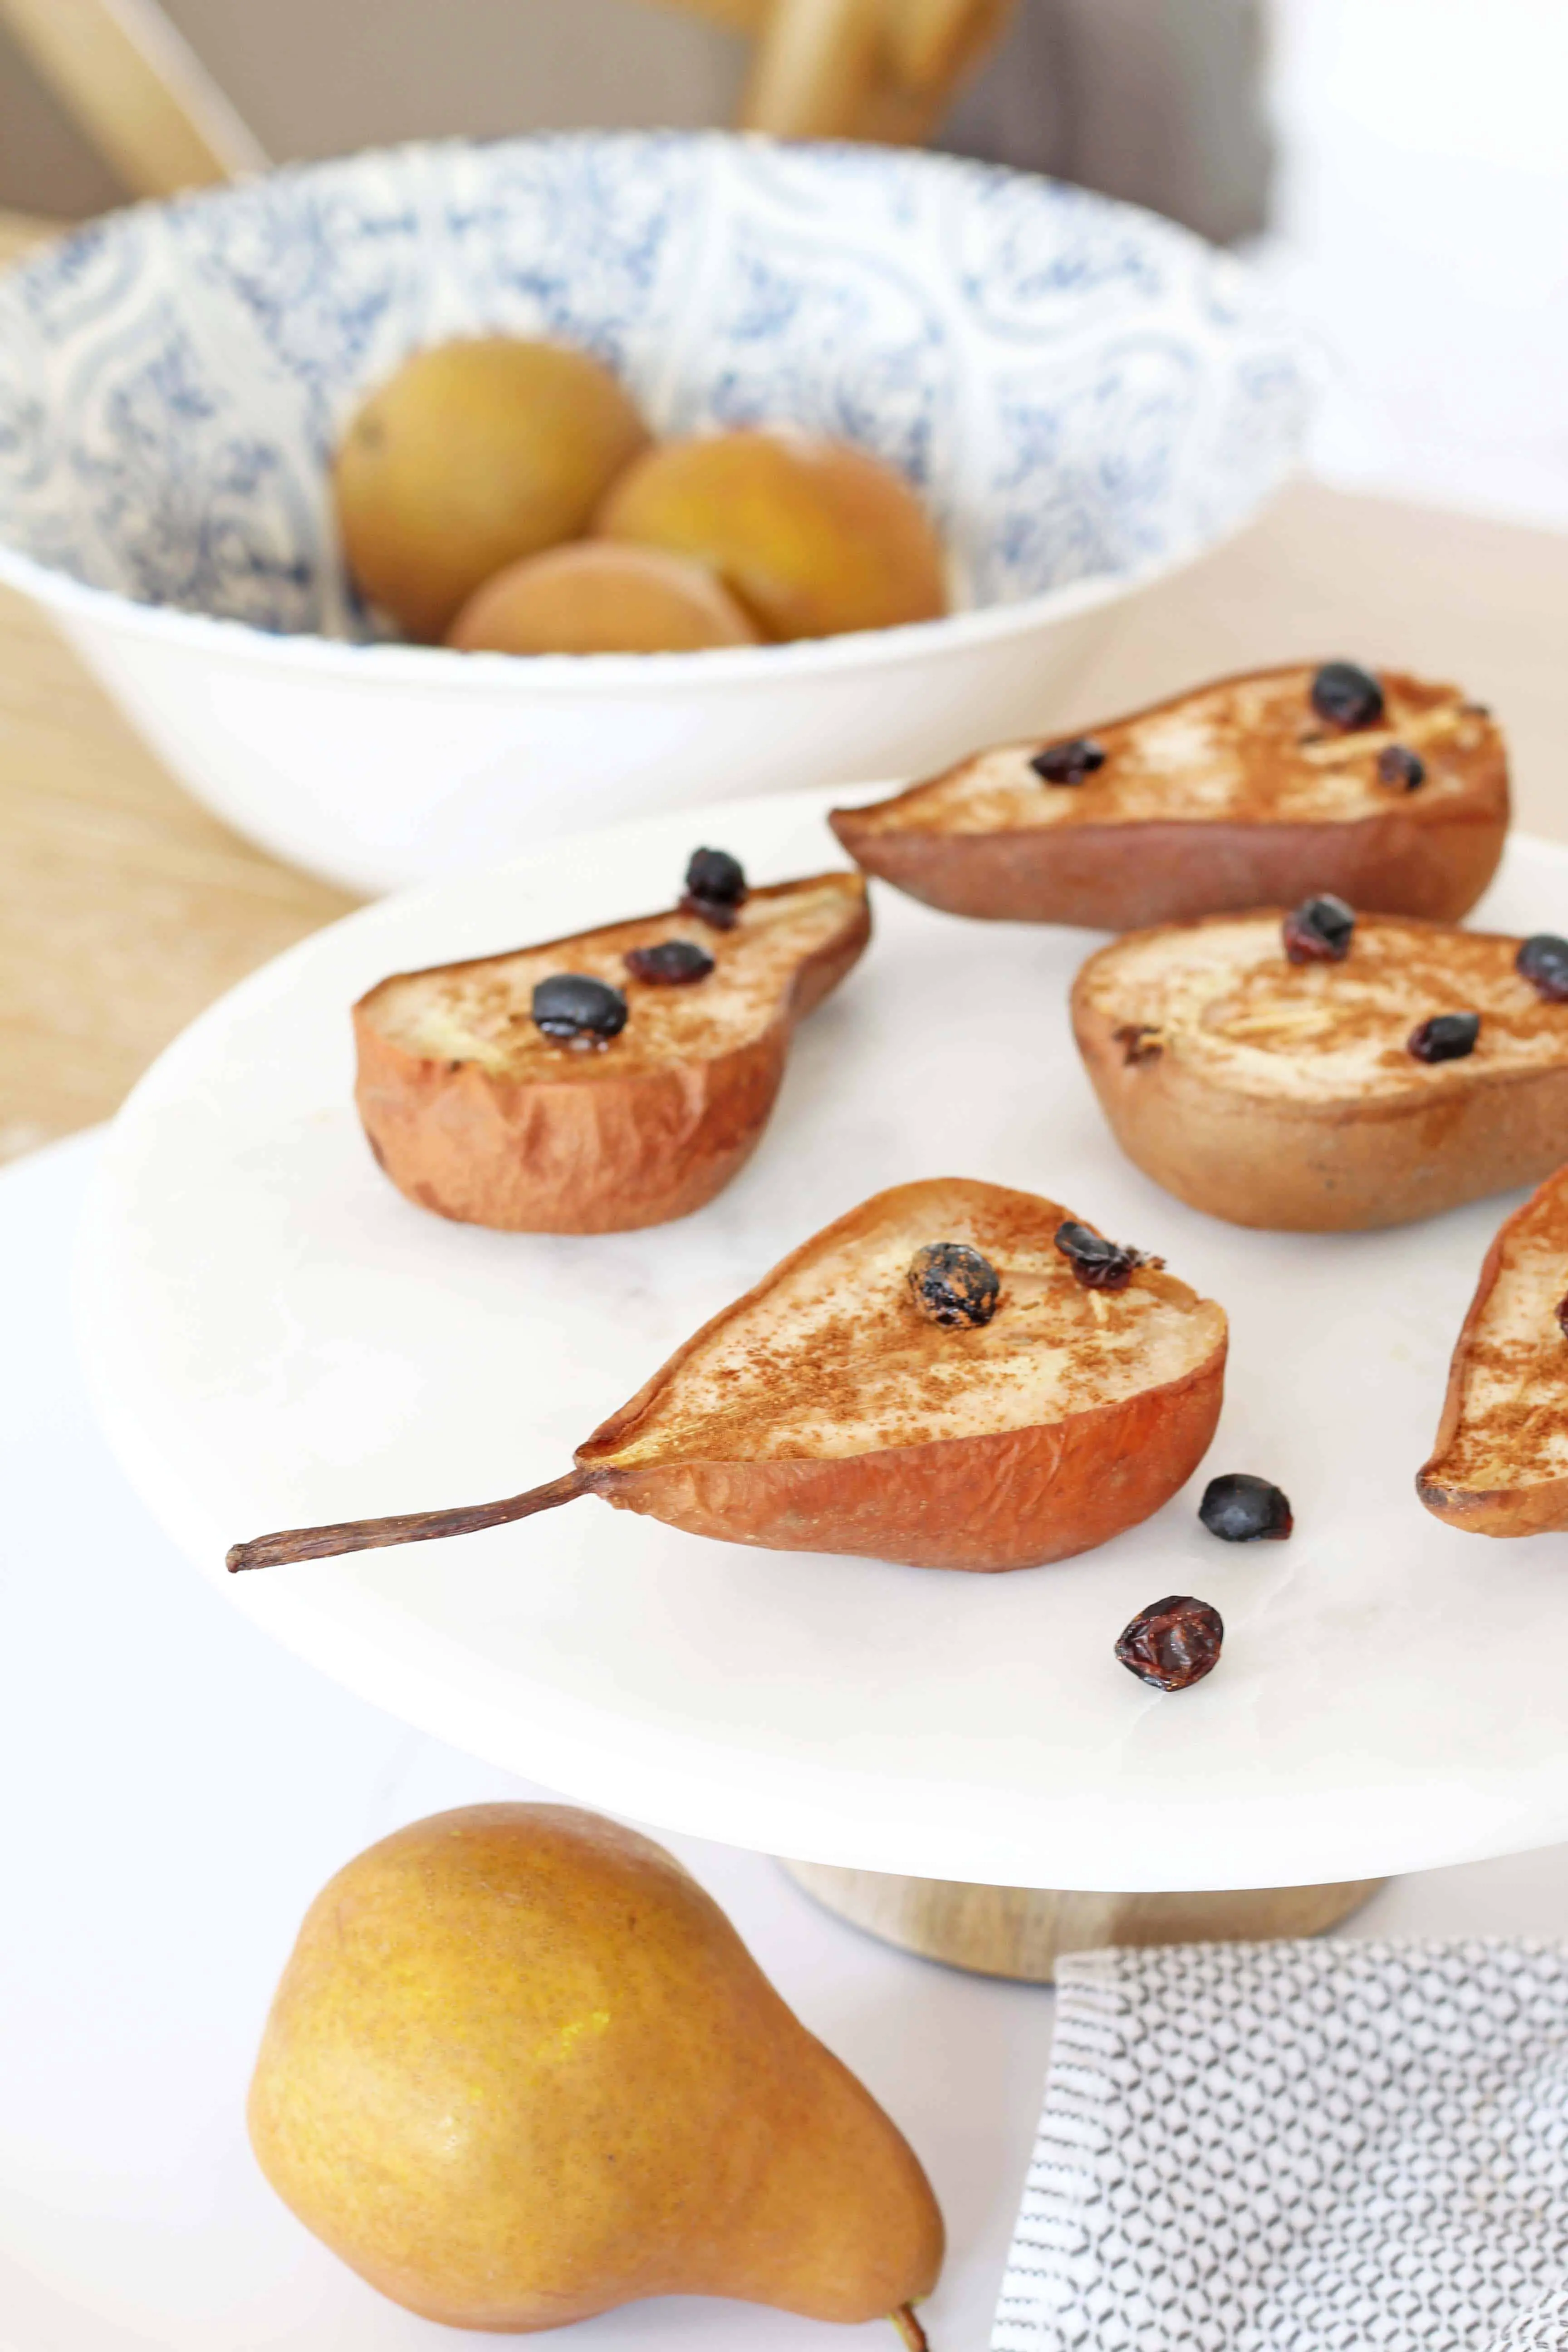 Baked cinnamon pear with currants recipe.